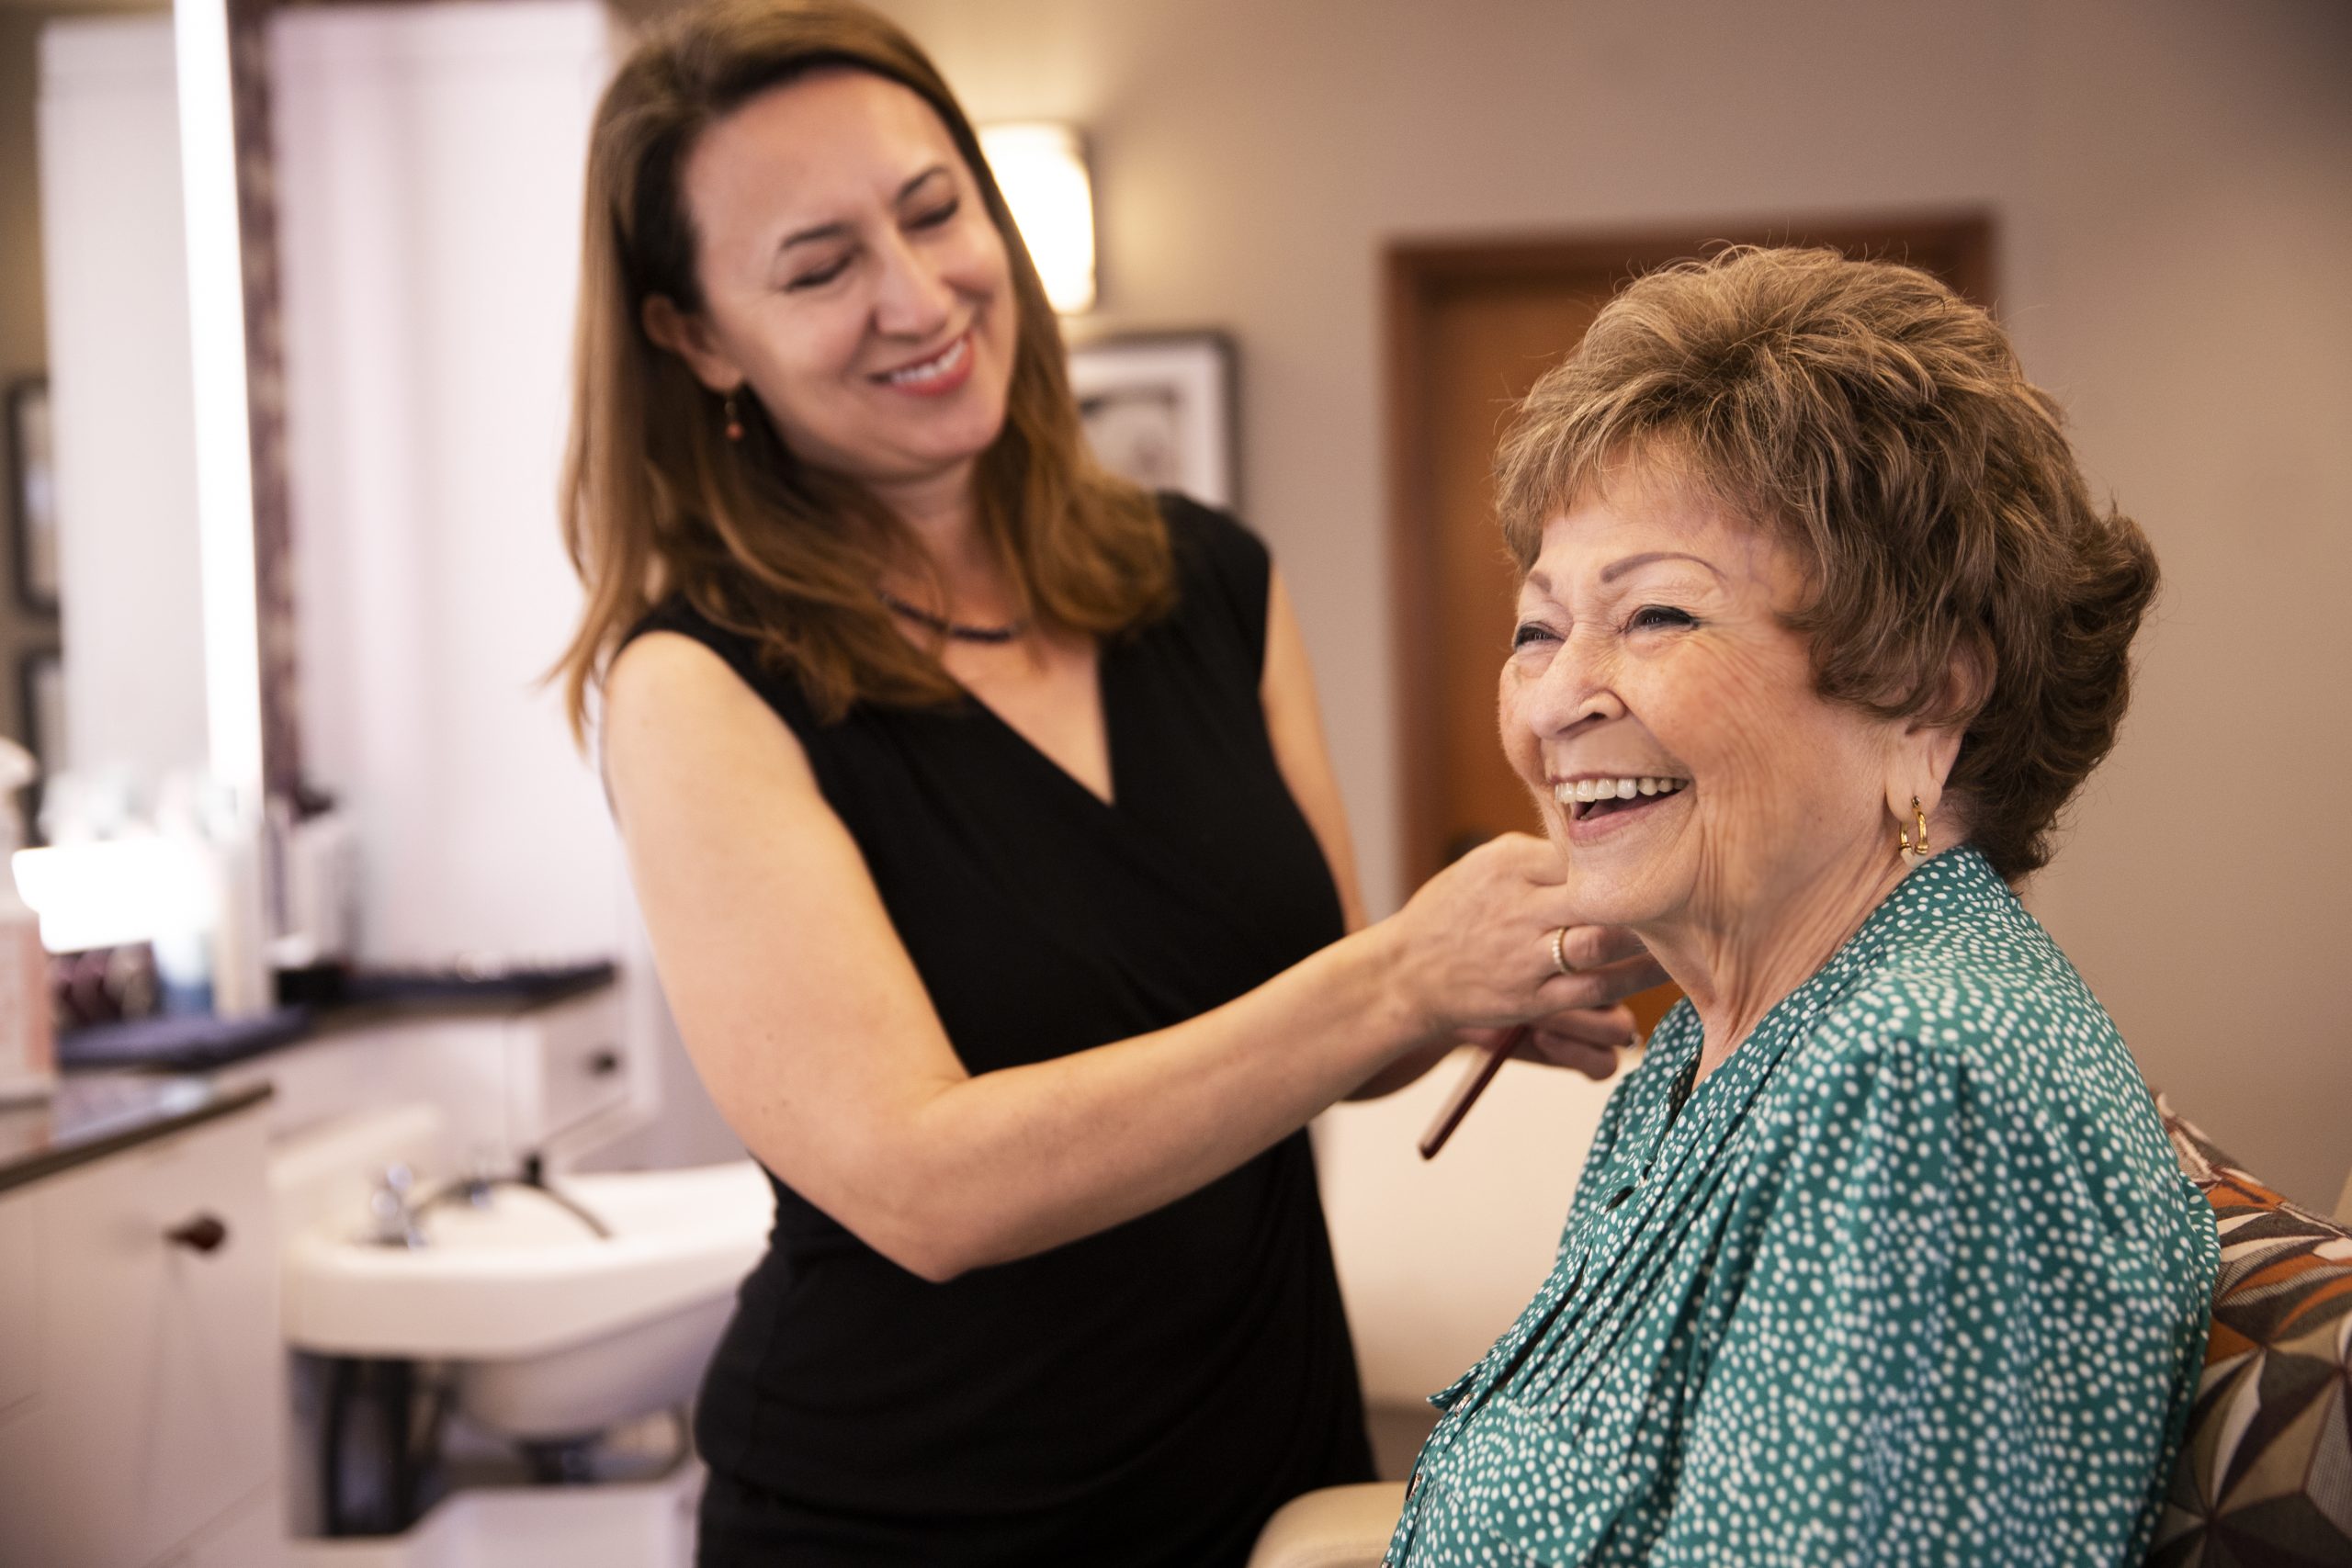 Elderly woman getting her hair done in a salon